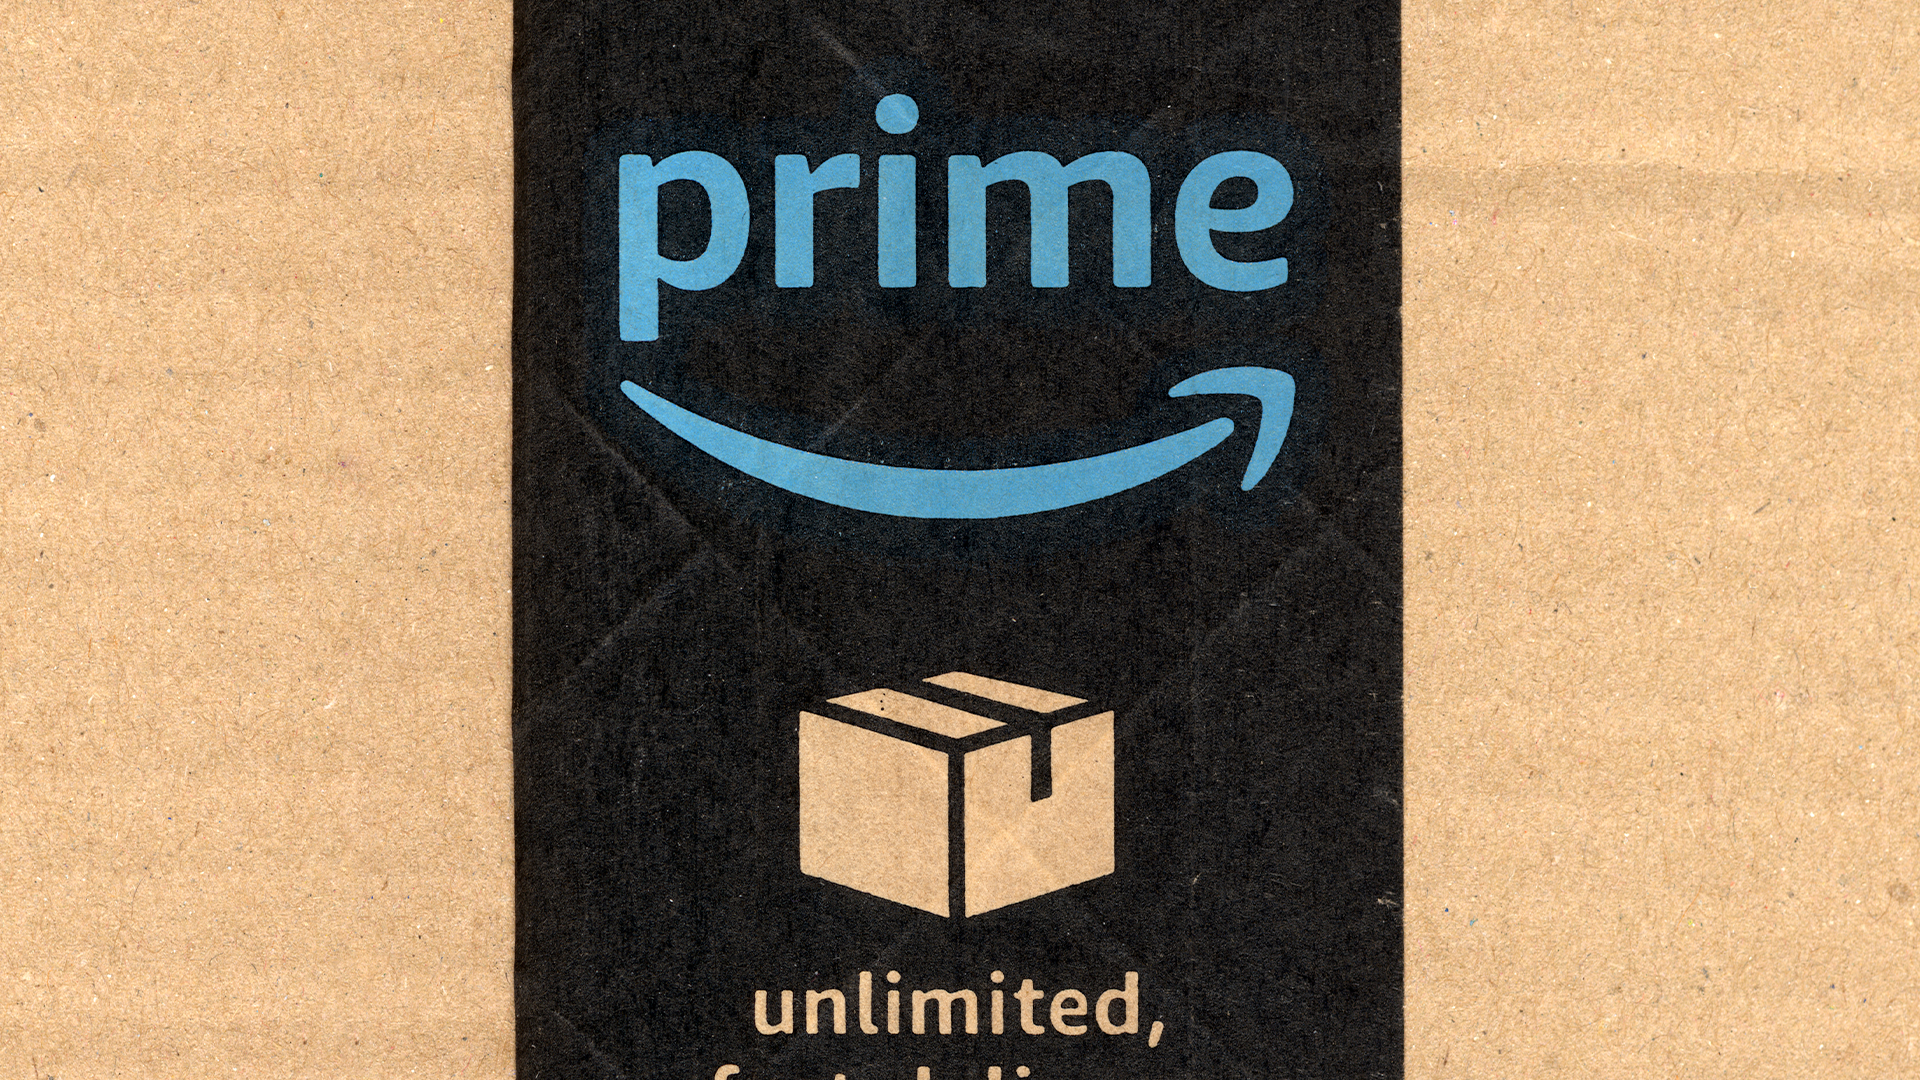 A close-up of an Amazon package.